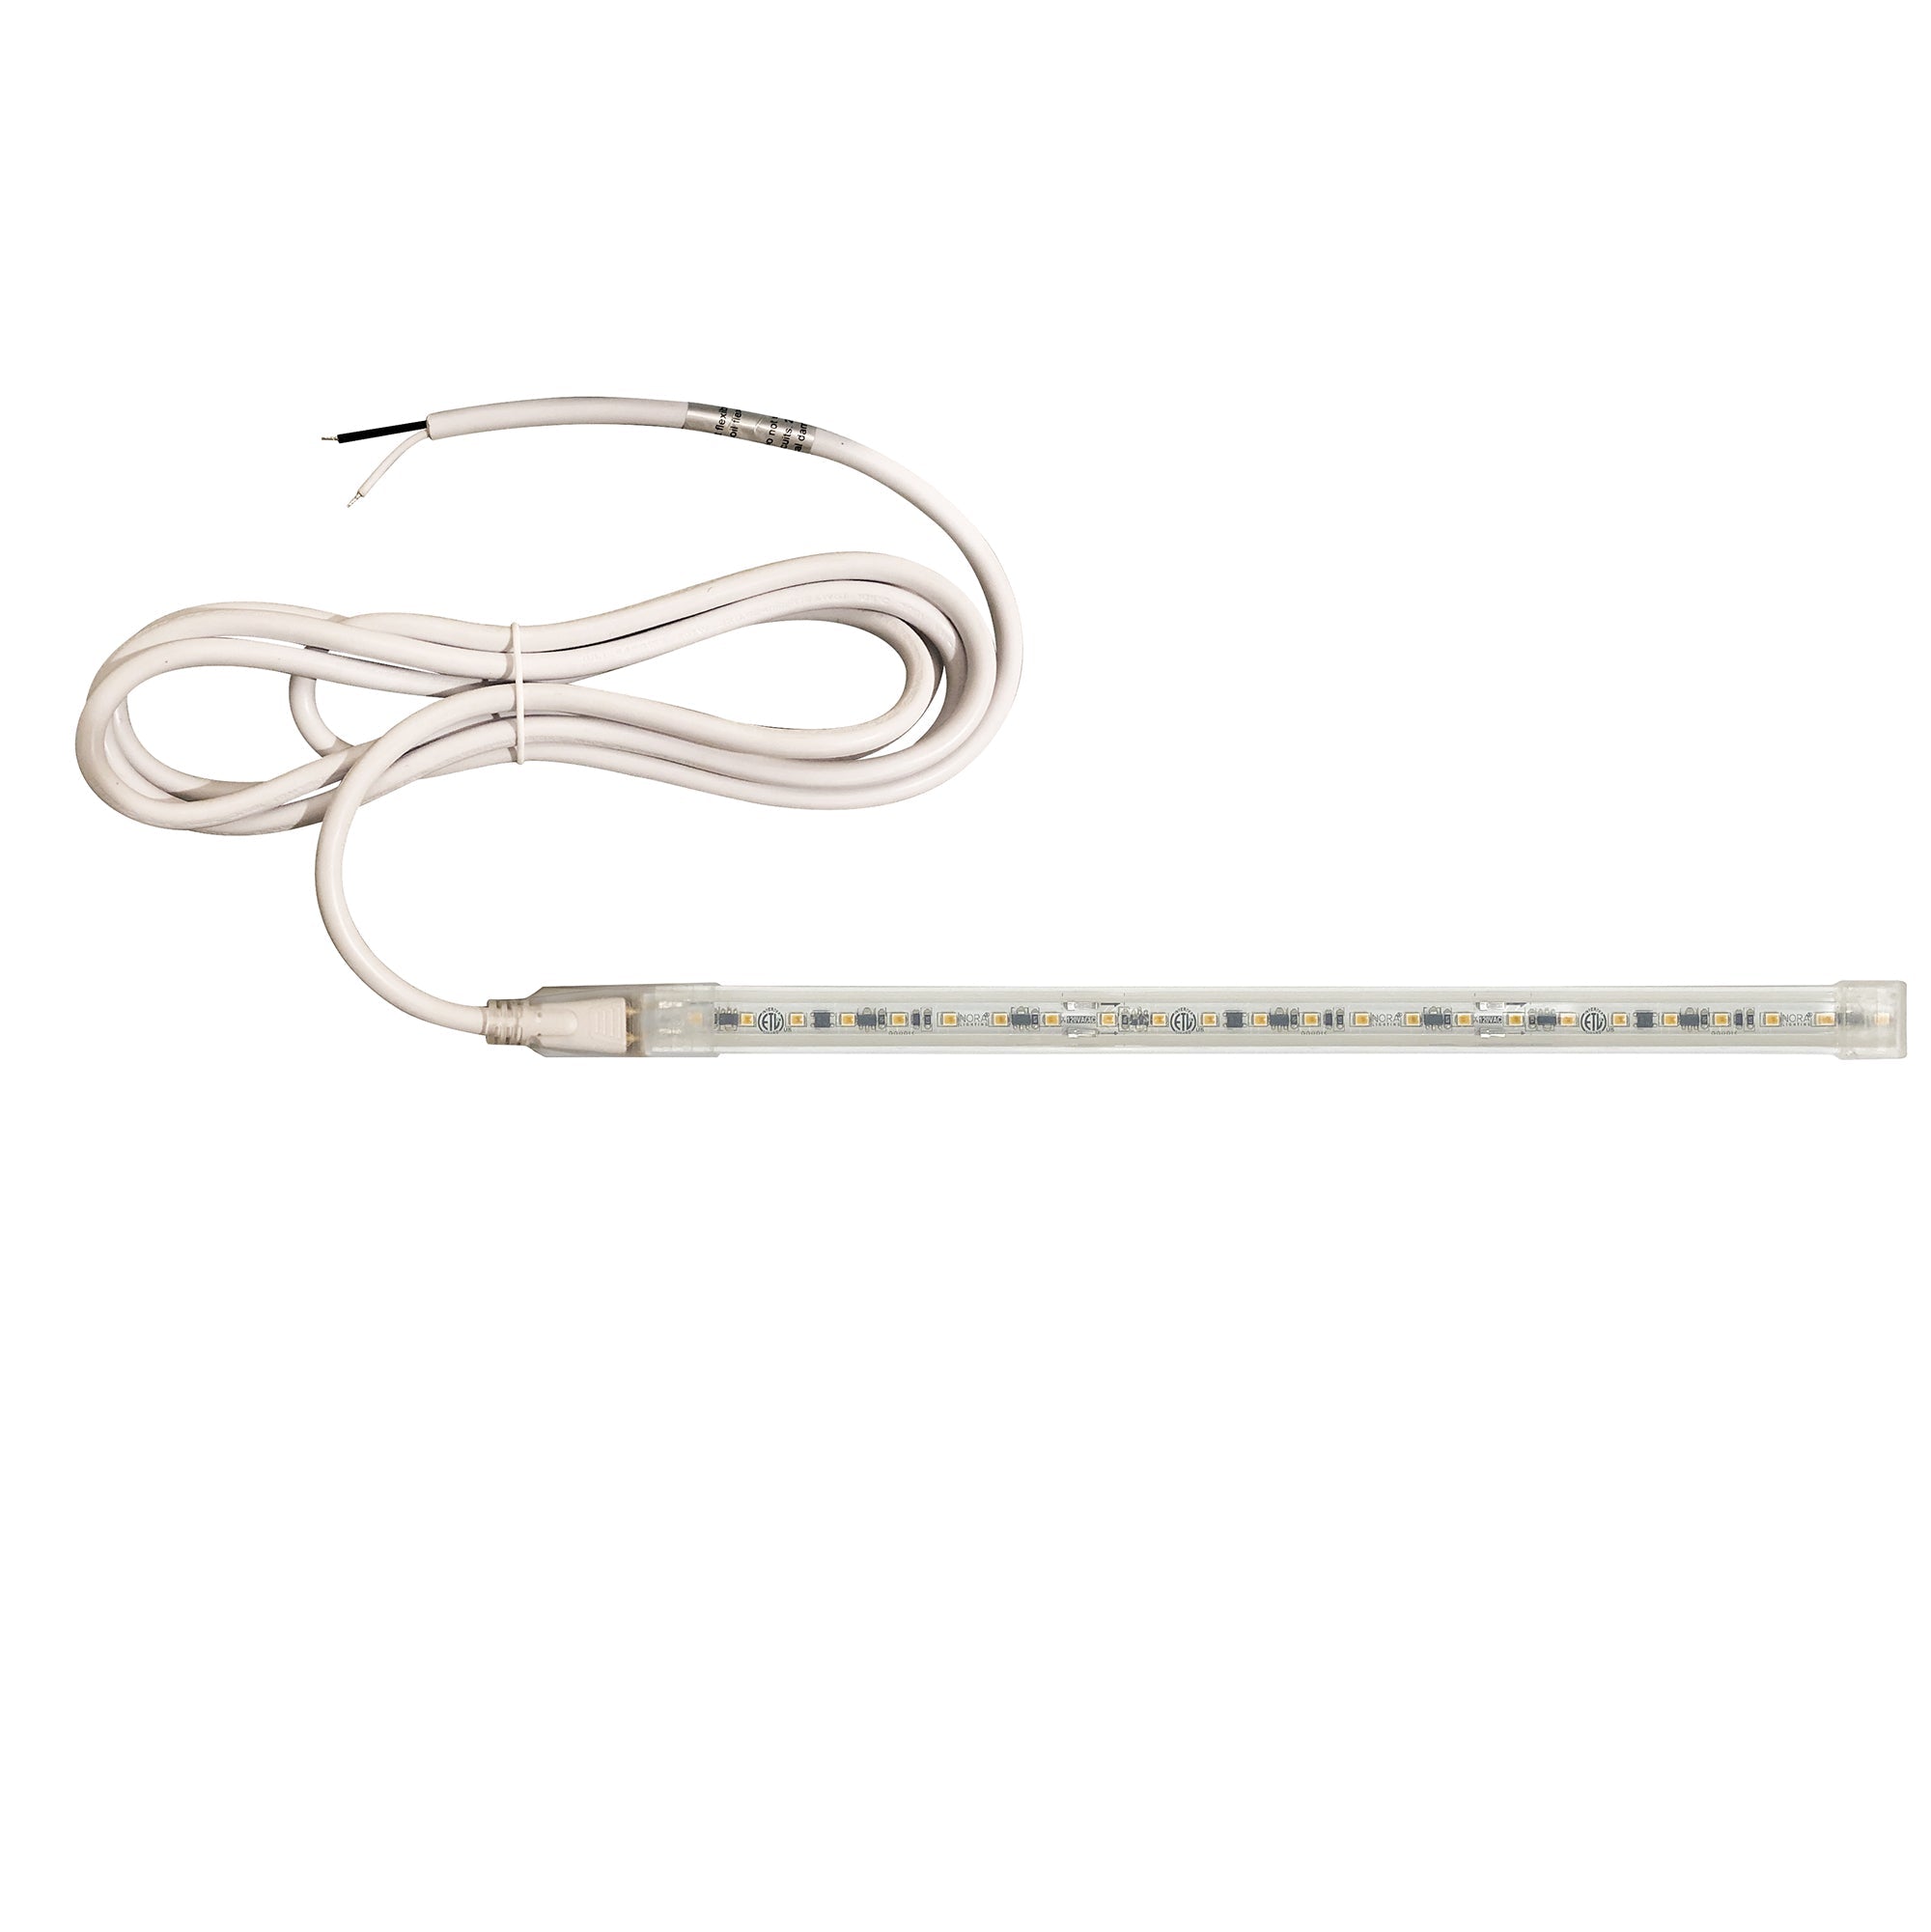 Nora Lighting NUTP13-W52-12-930/HW - Accent / Undercabinet - Custom Cut 52-ft 120V Continuous LED Tape Light, 330lm / 3.6W per foot, 3000K, w/ Mounting Clips and 8' Hardwired Power Cord